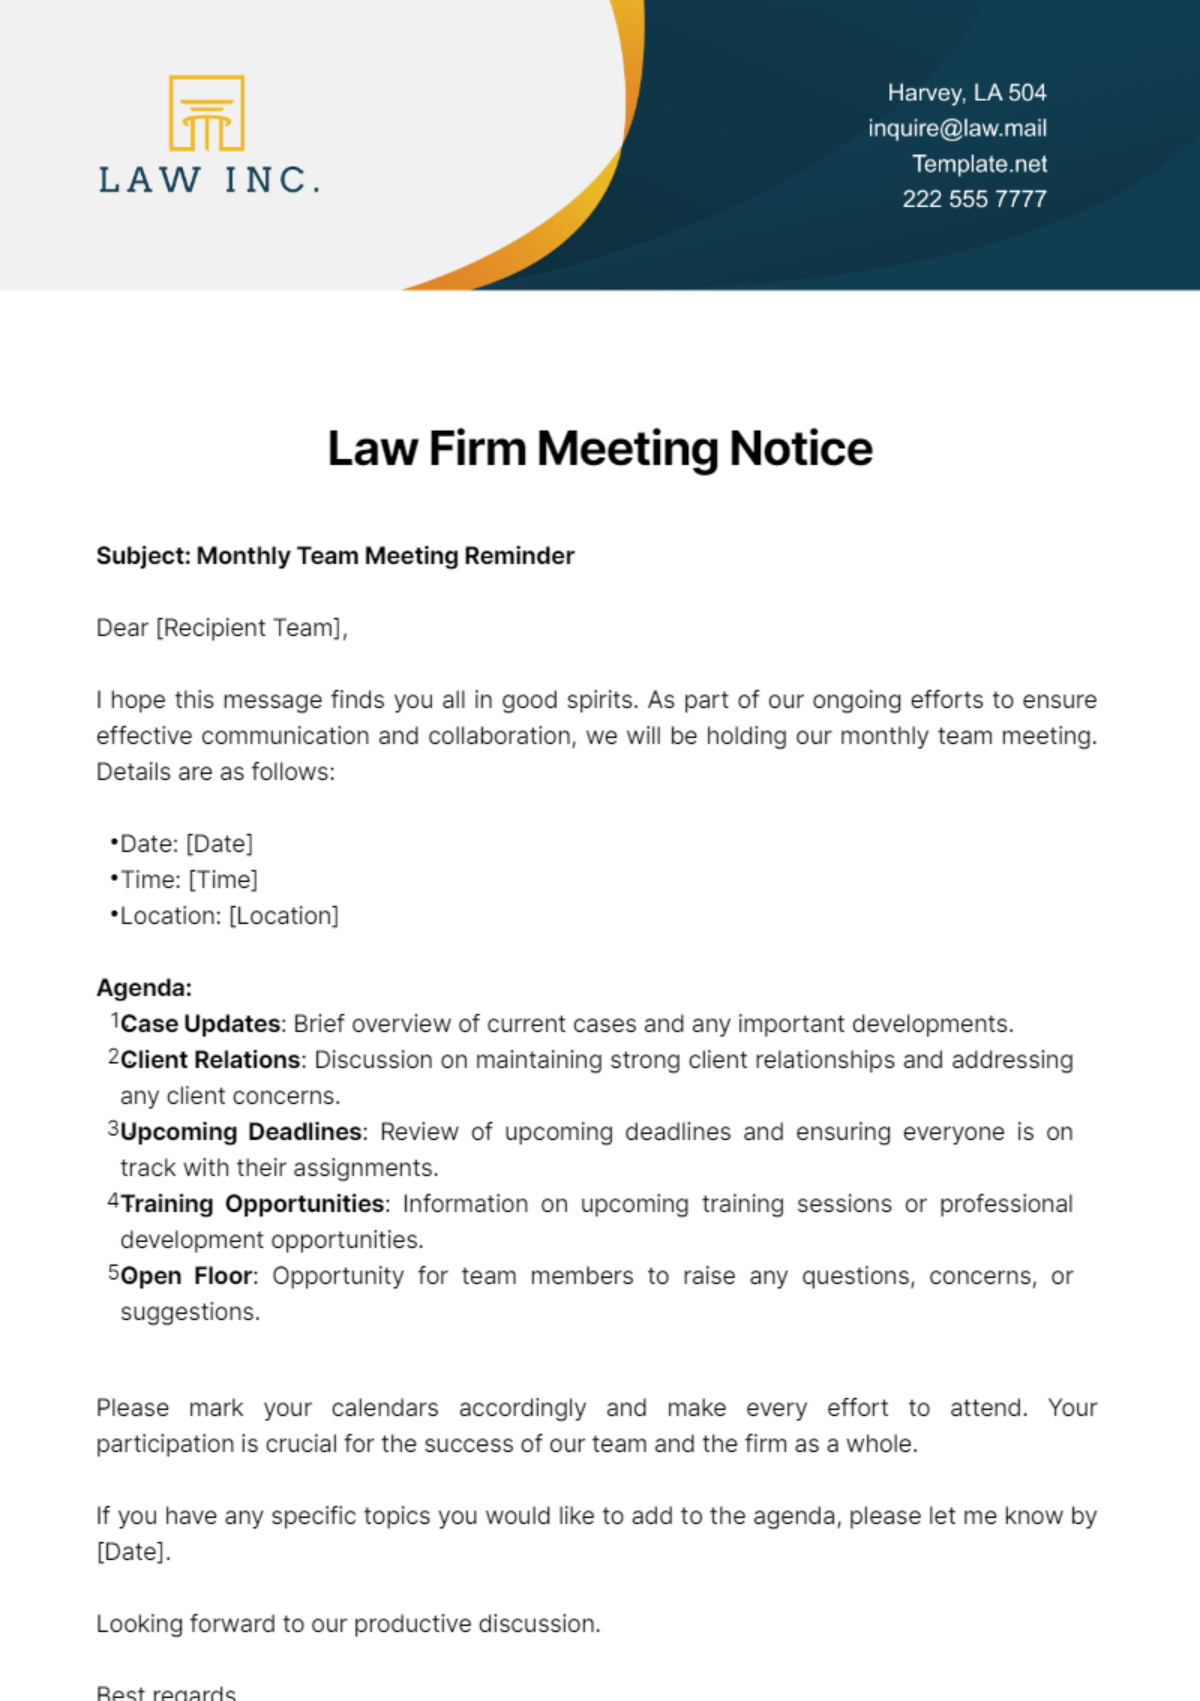 Law Firm Meeting Notice Template